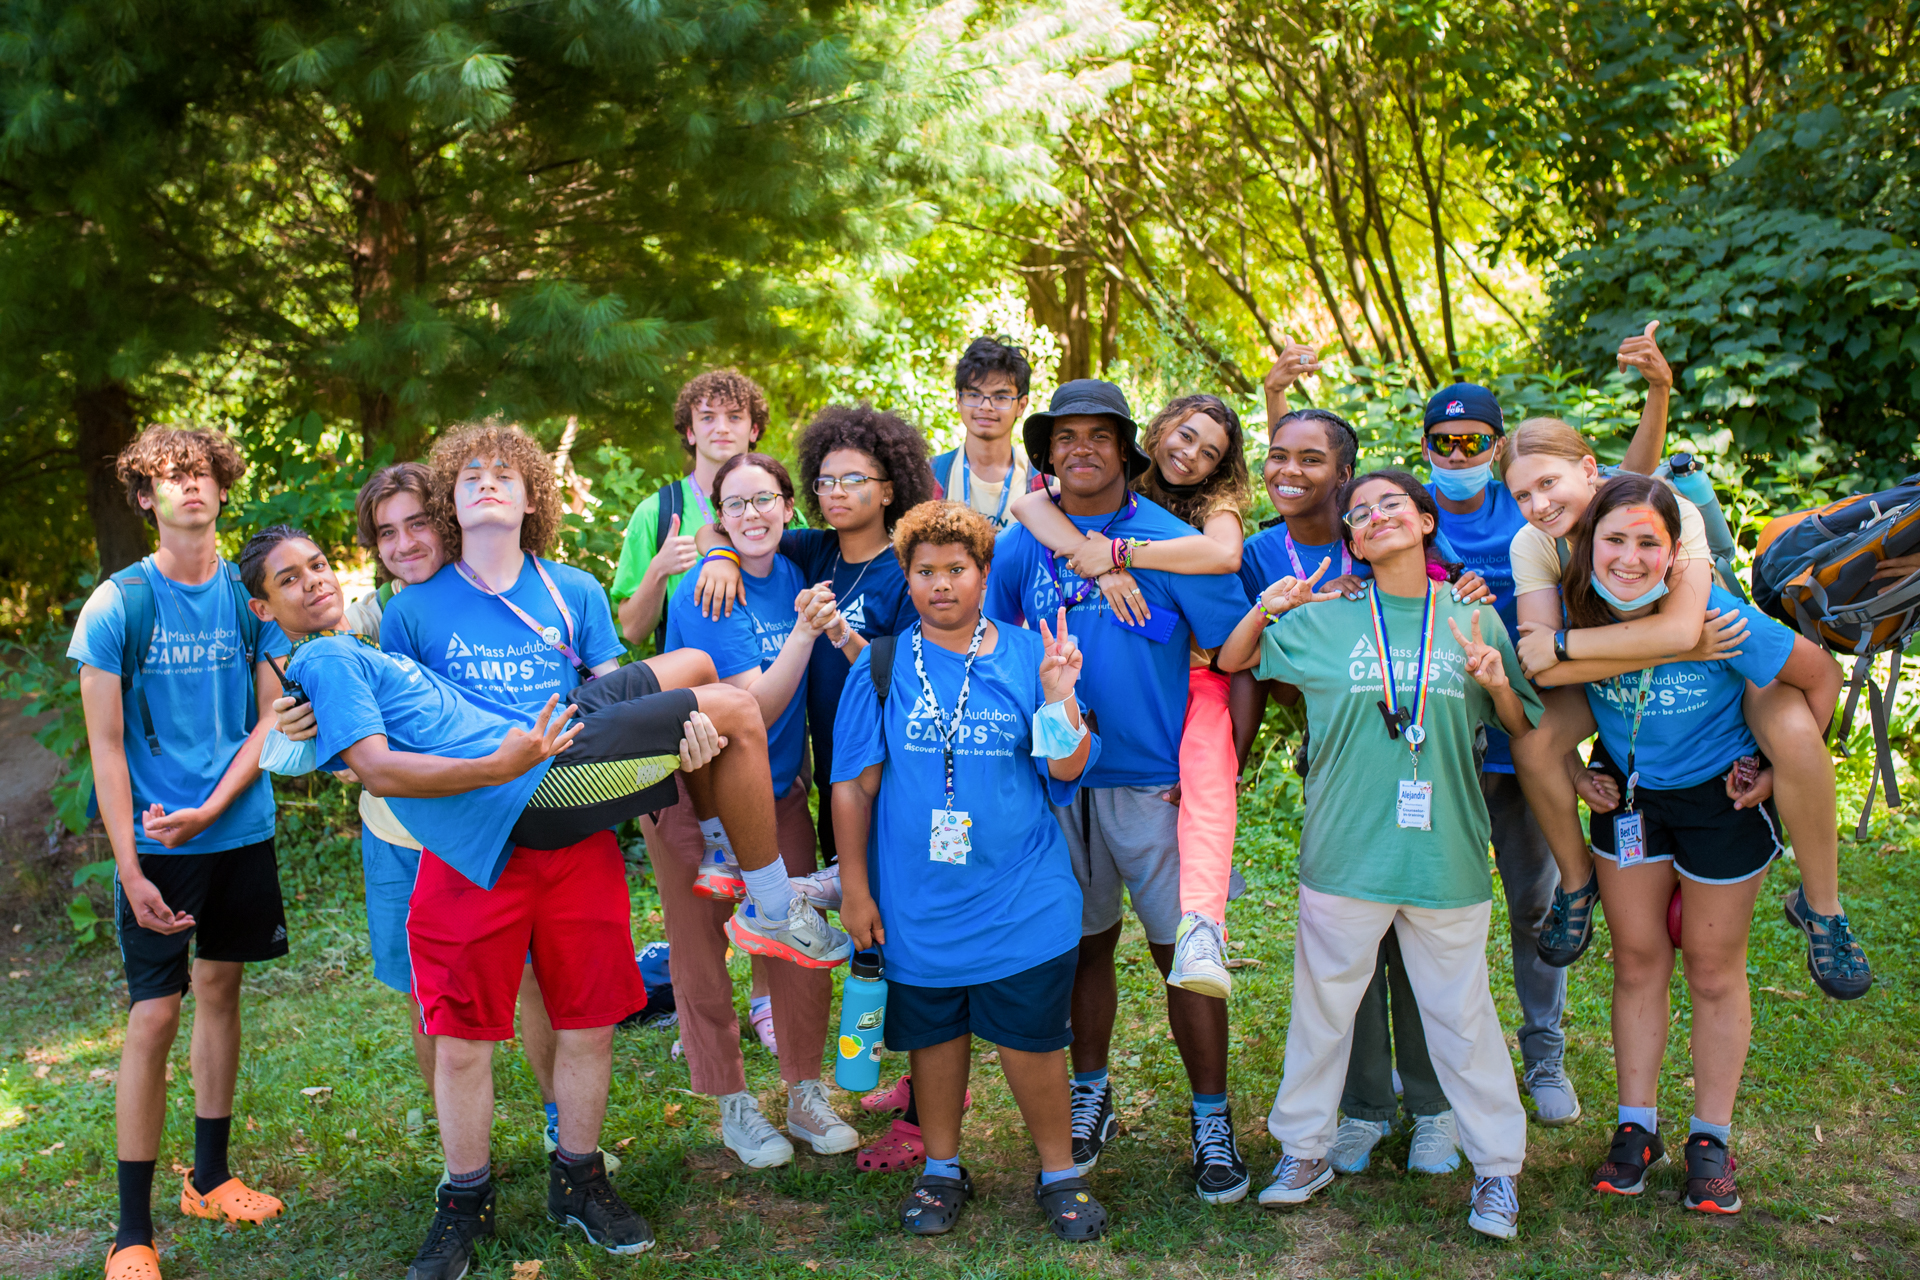 Counselors and CITs wearing blue and green Mass Audubon Camps staff shirts pose for a group photo